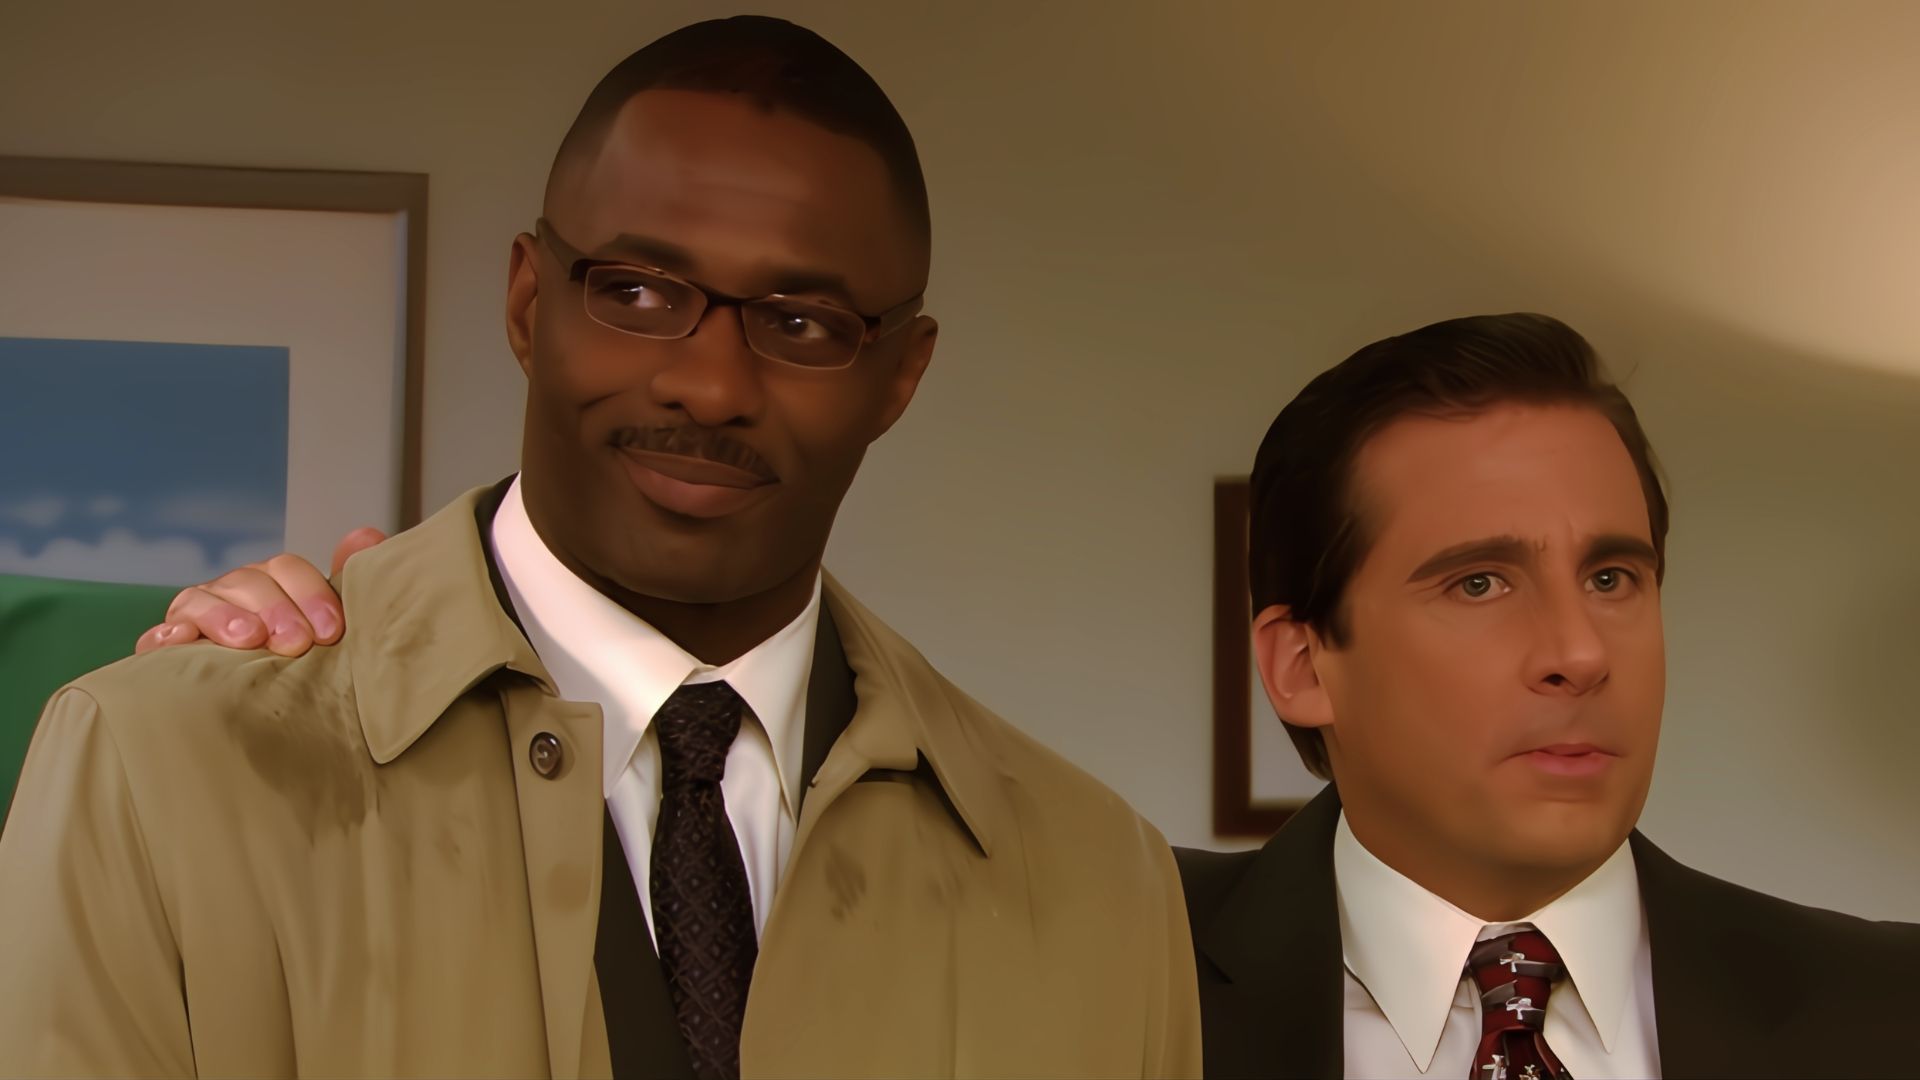 Idris Elba and Steve Carell as Michael Scott in The Office TV show